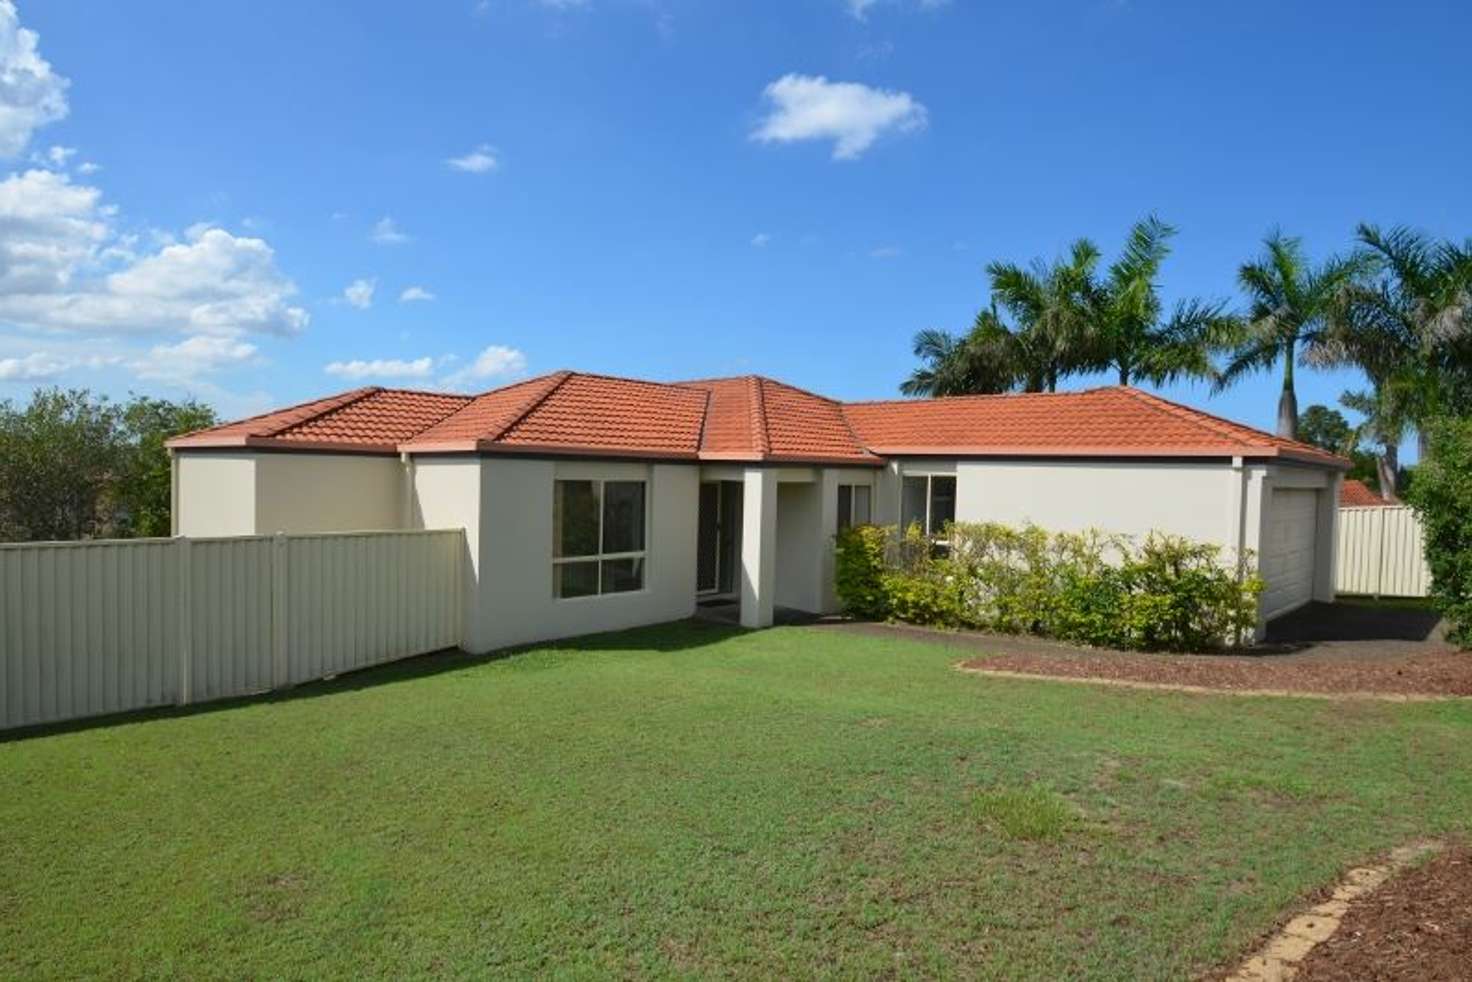 Main view of Homely house listing, 6 Respall Way, Arundel QLD 4214